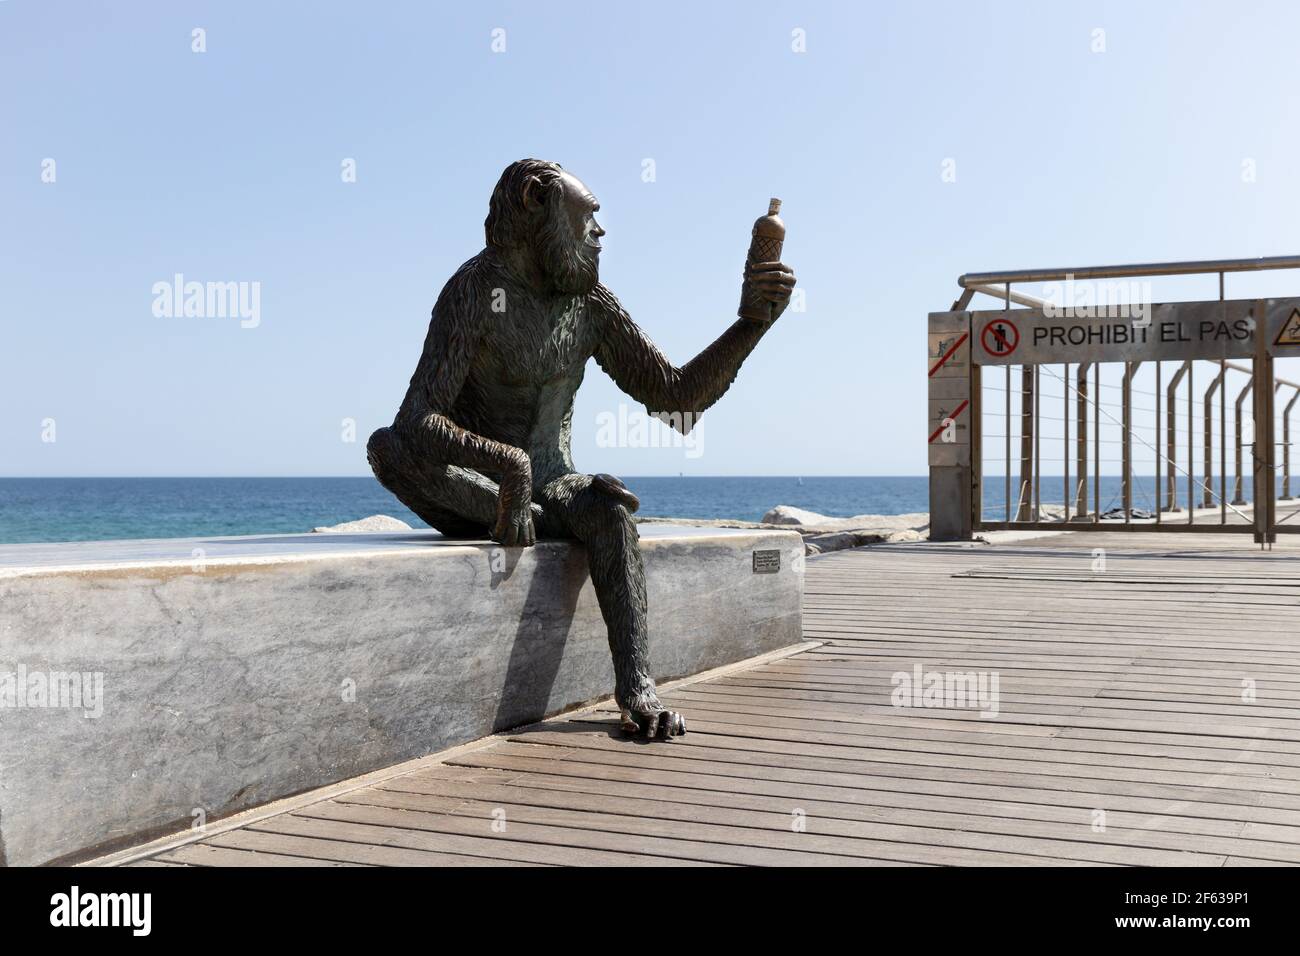 BADALONA, SPAIN-MARCH 29, 2021: Monkey statue on the seafront of Badalona by Susana Ruiz Blanch. The monkey has the face of Charles Darwin, and she ho Stock Photo